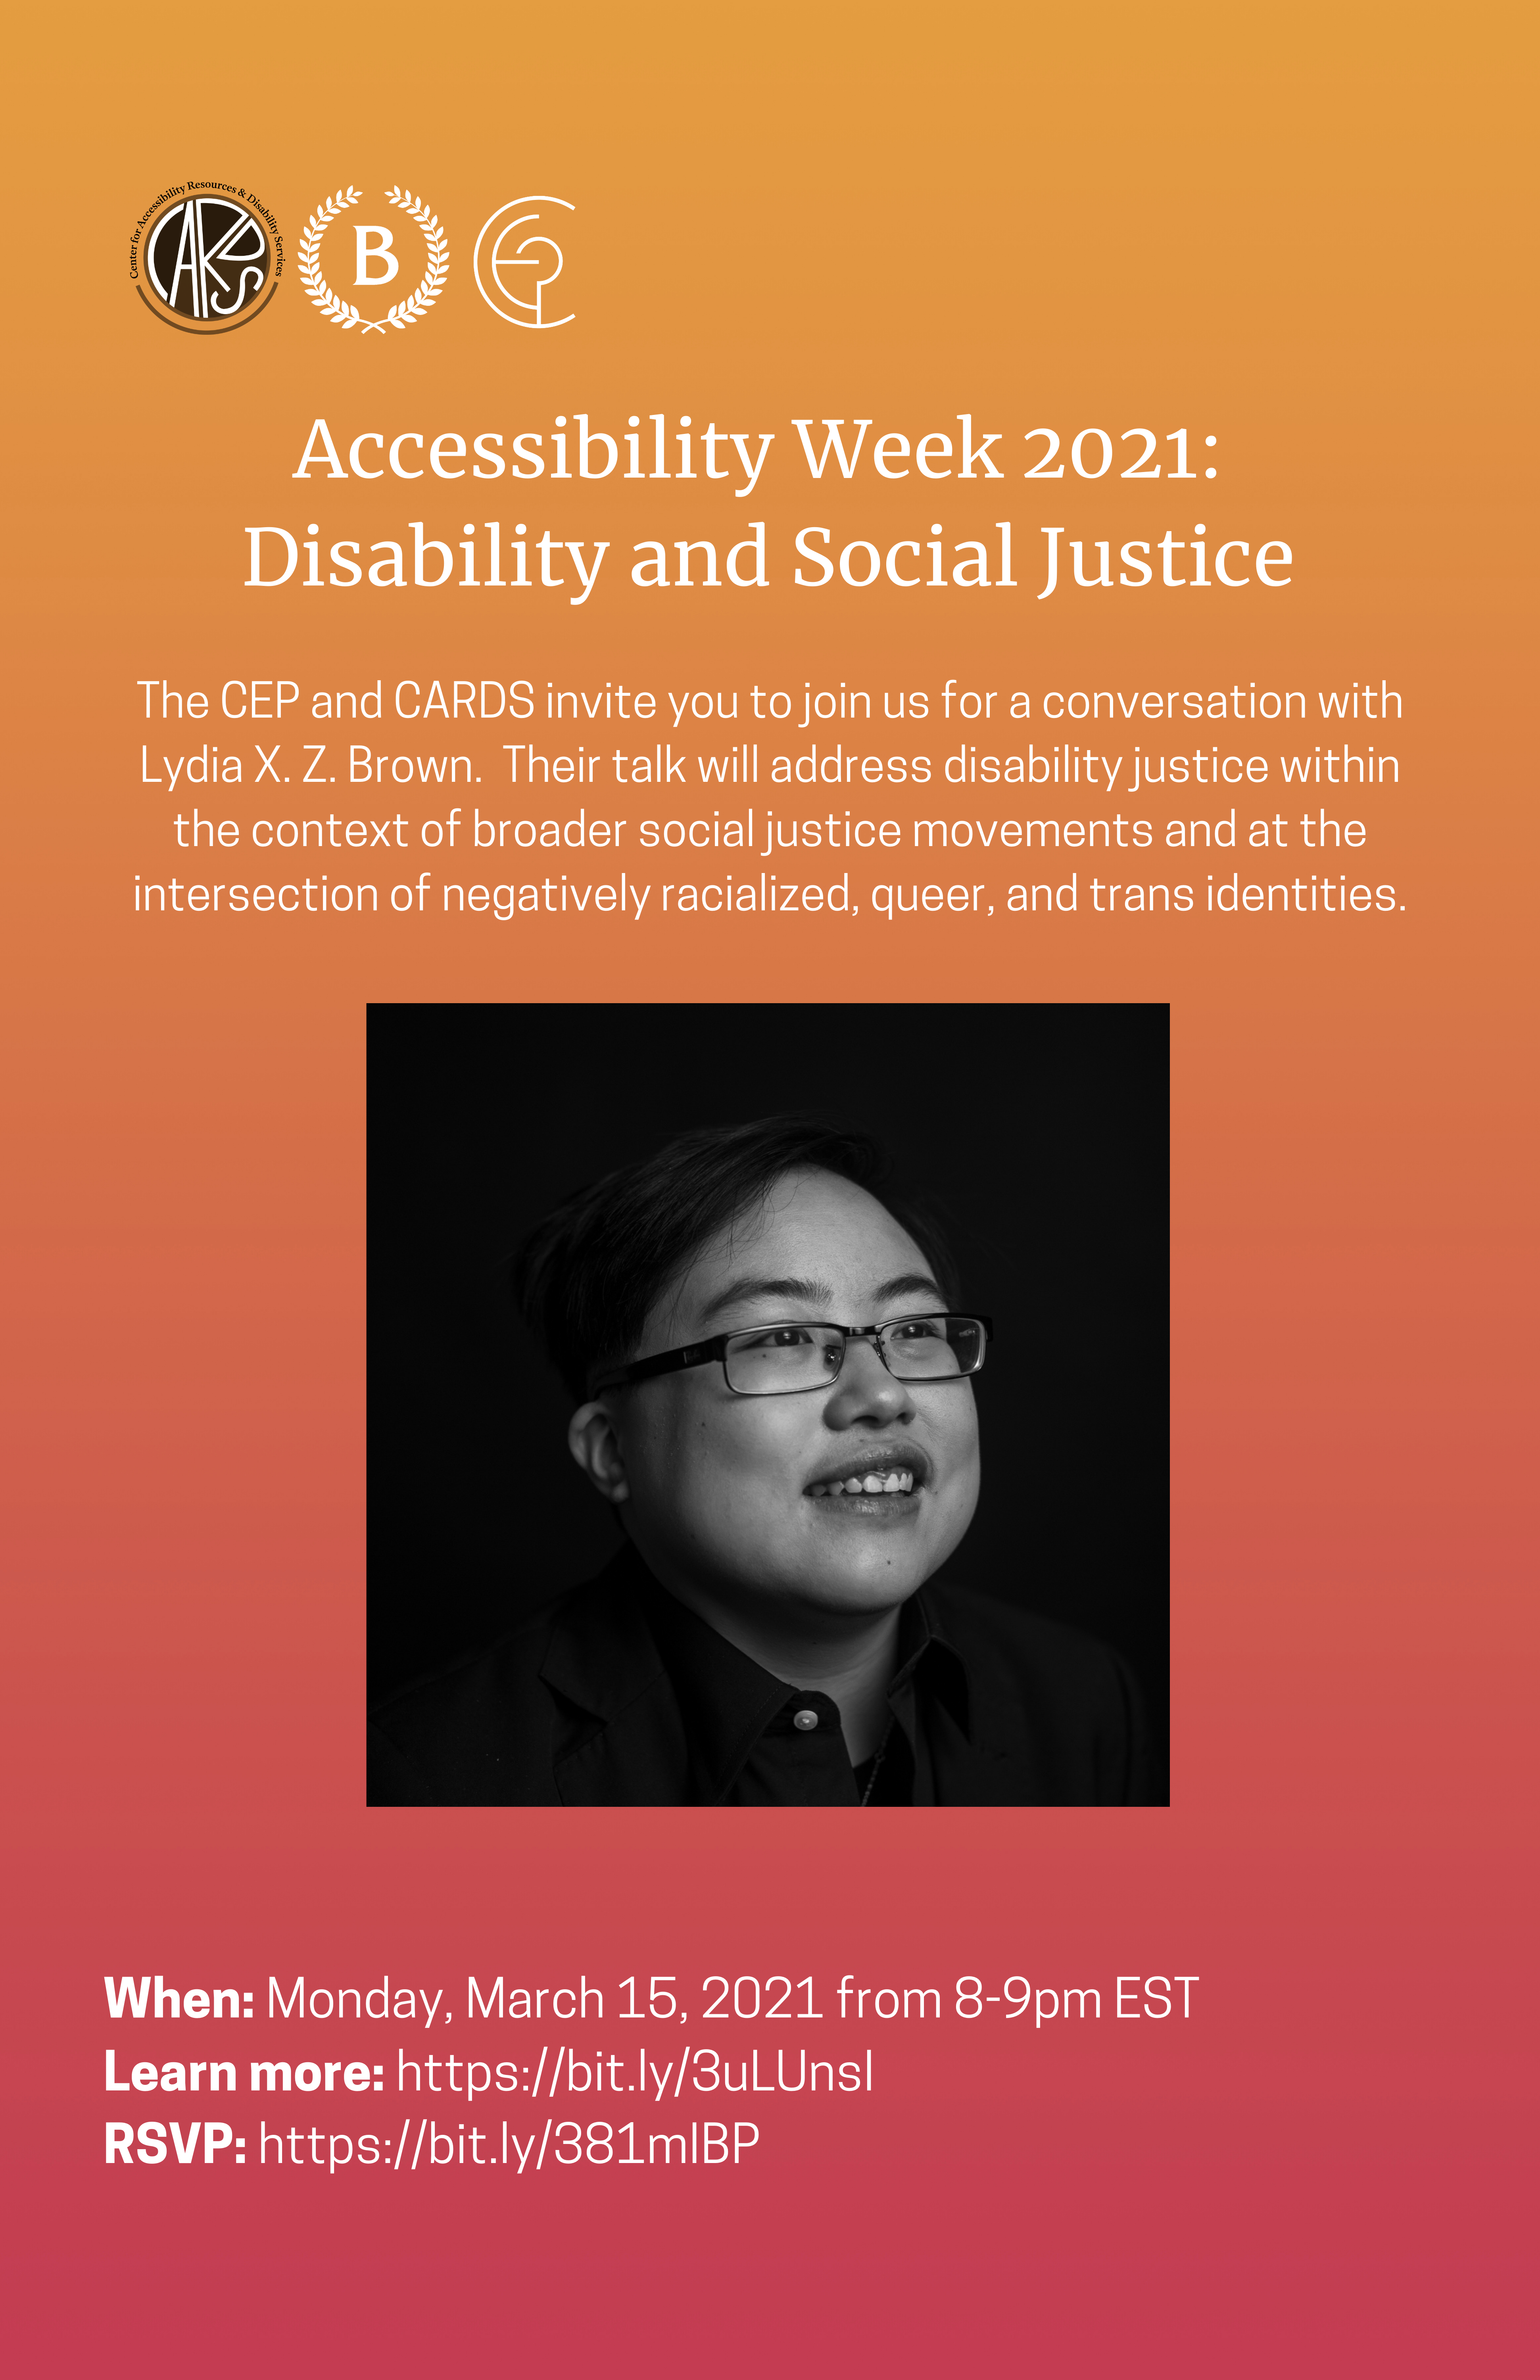 Flyer for Accessibility Week 2021 featuring a black and white photo of a young East Asian person with glasses smiling and laughing, looking slightly away from the camera. Photo by Colin Pieters.